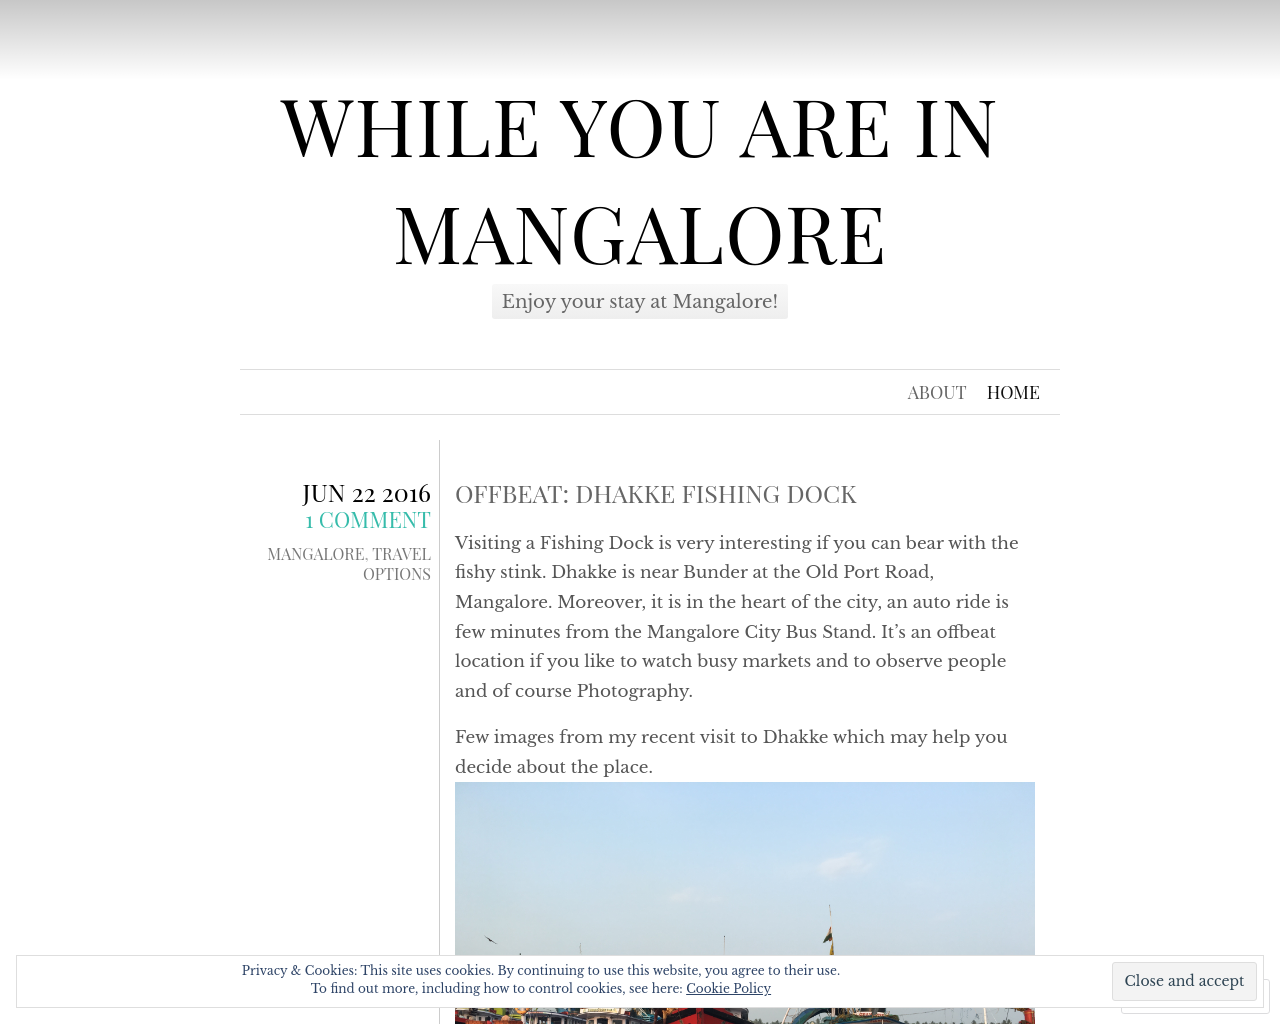 While you are in Mangalore